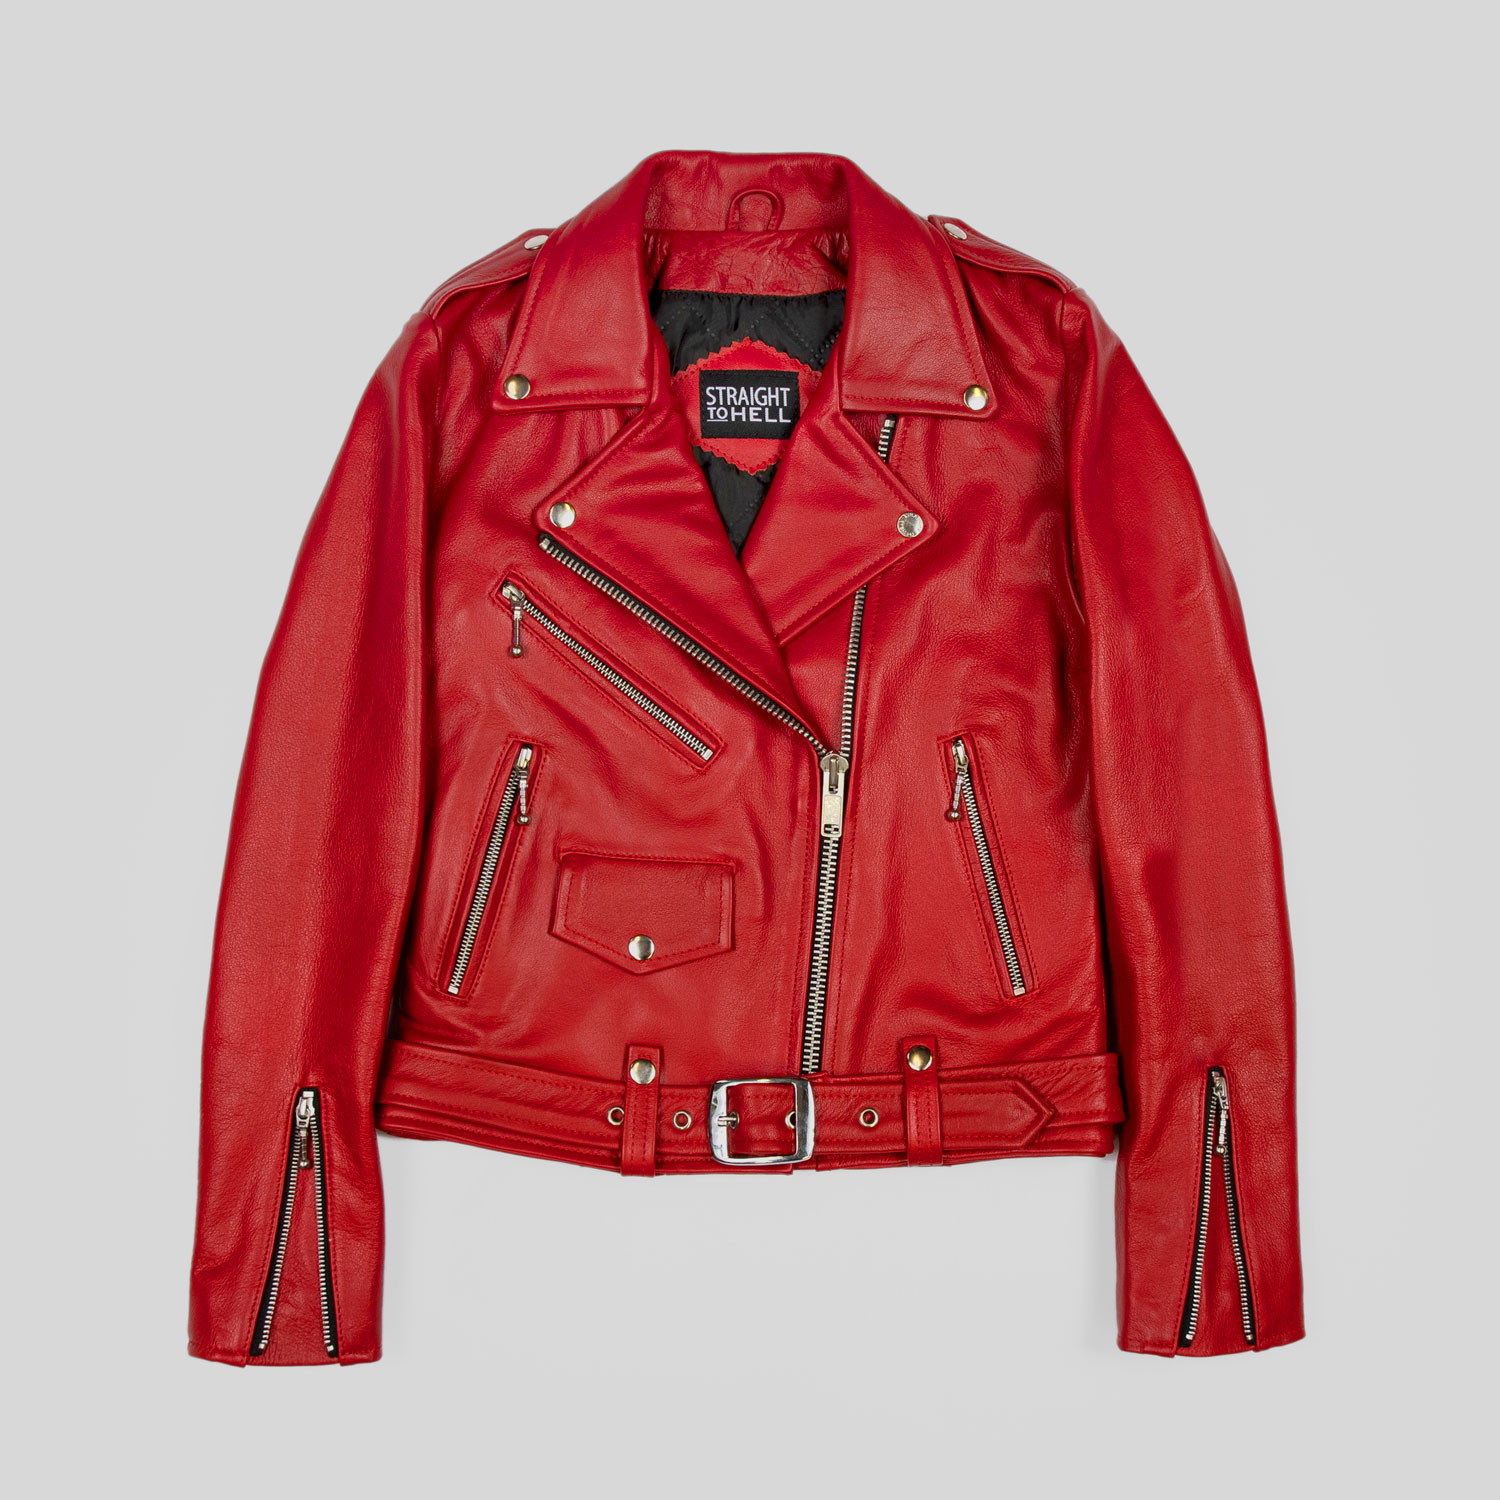 Commando - Blood | To Hell Leather Straight Jacket Red Apparel